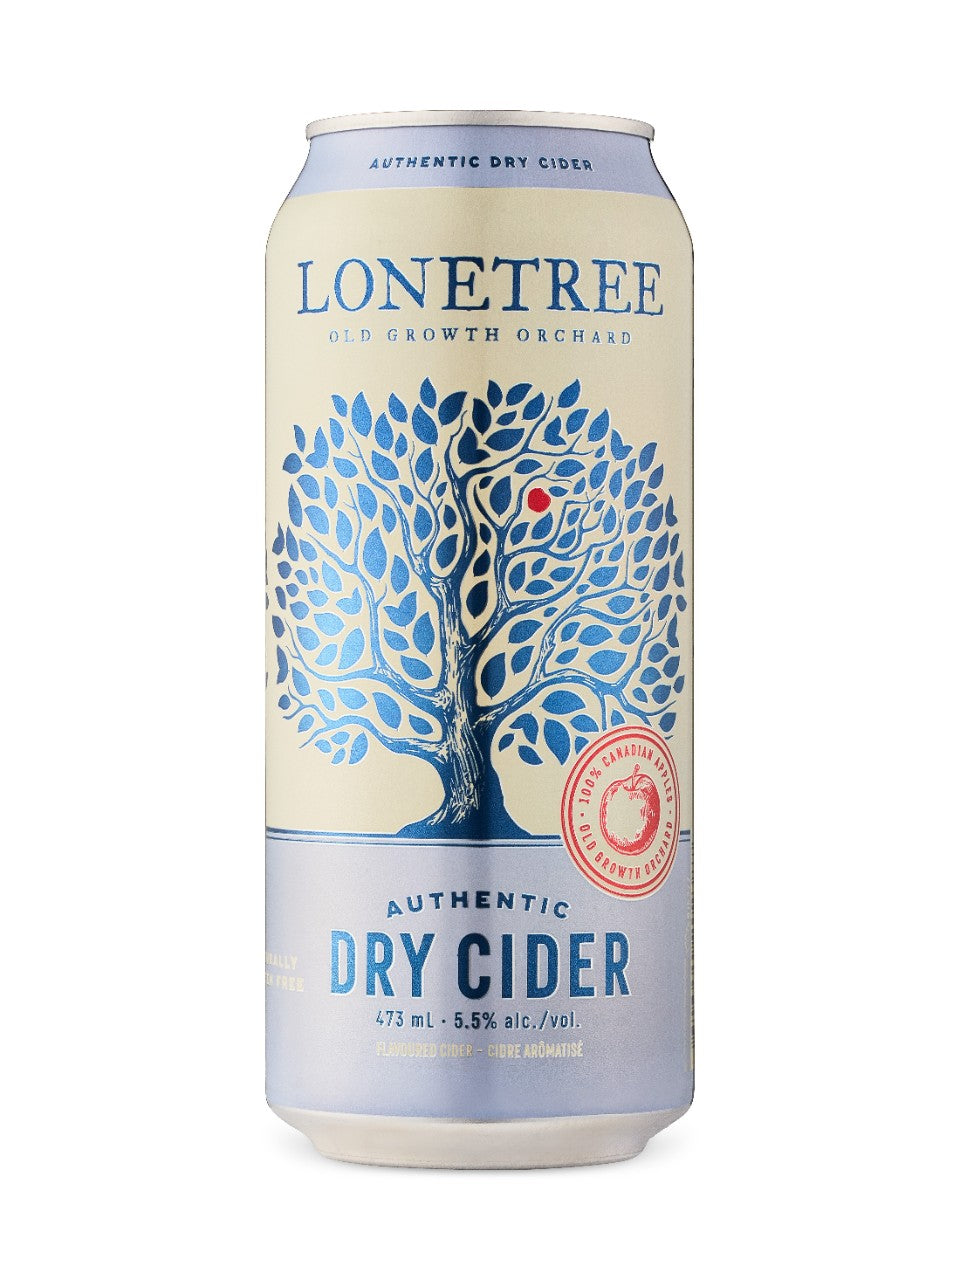 Lonetree Authentic Dry Cider 473 mL can